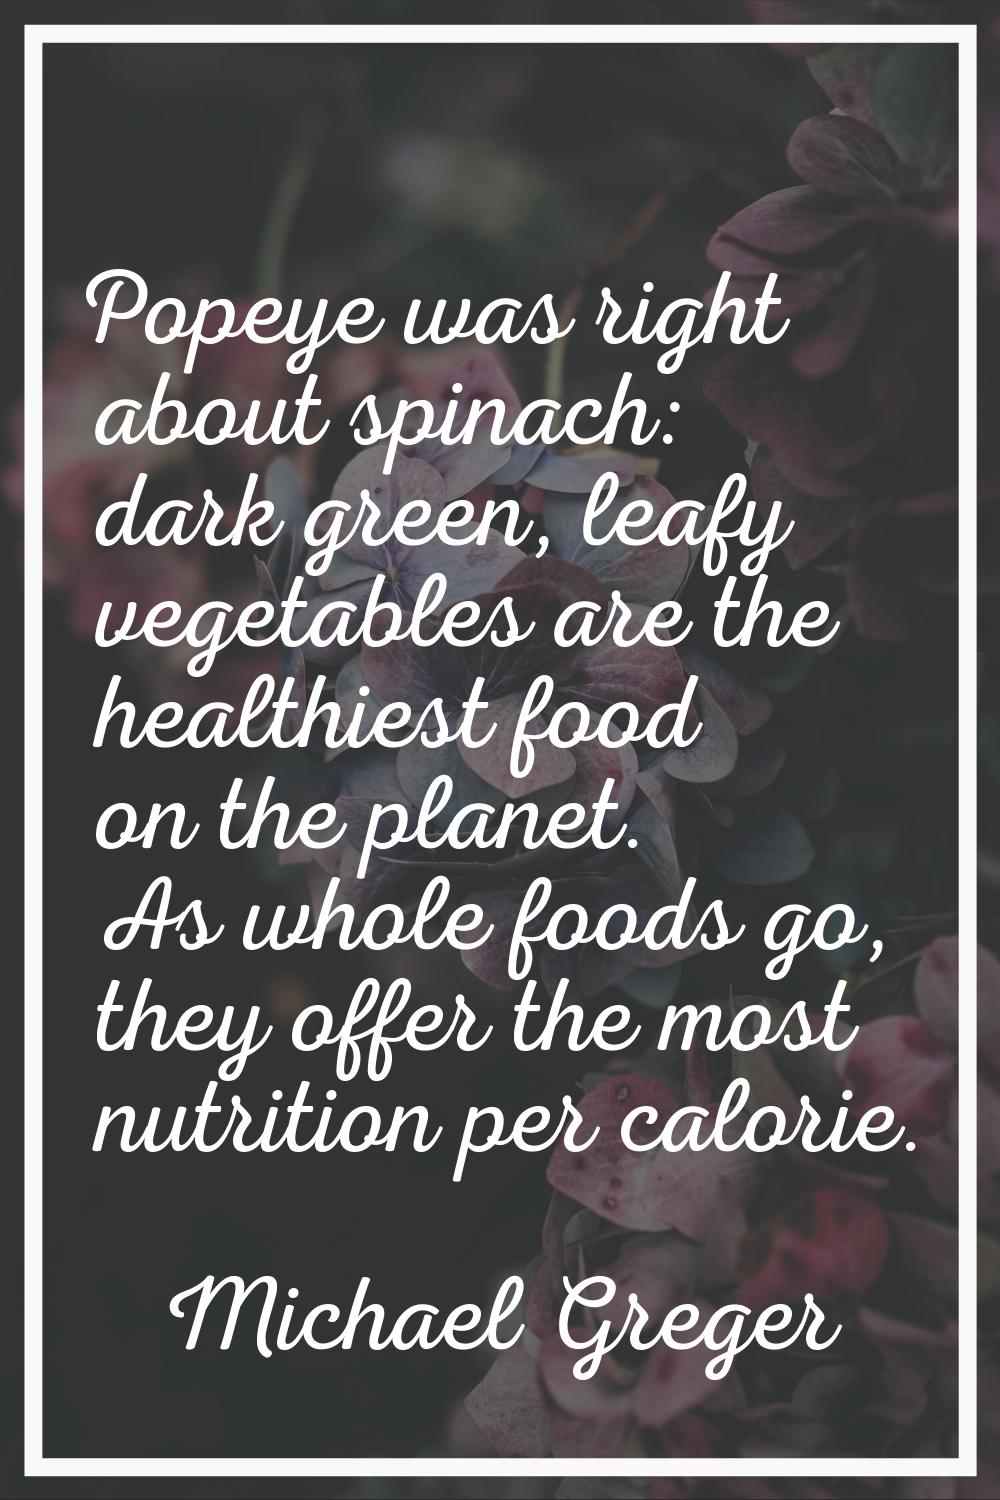 Popeye was right about spinach: dark green, leafy vegetables are the healthiest food on the planet.